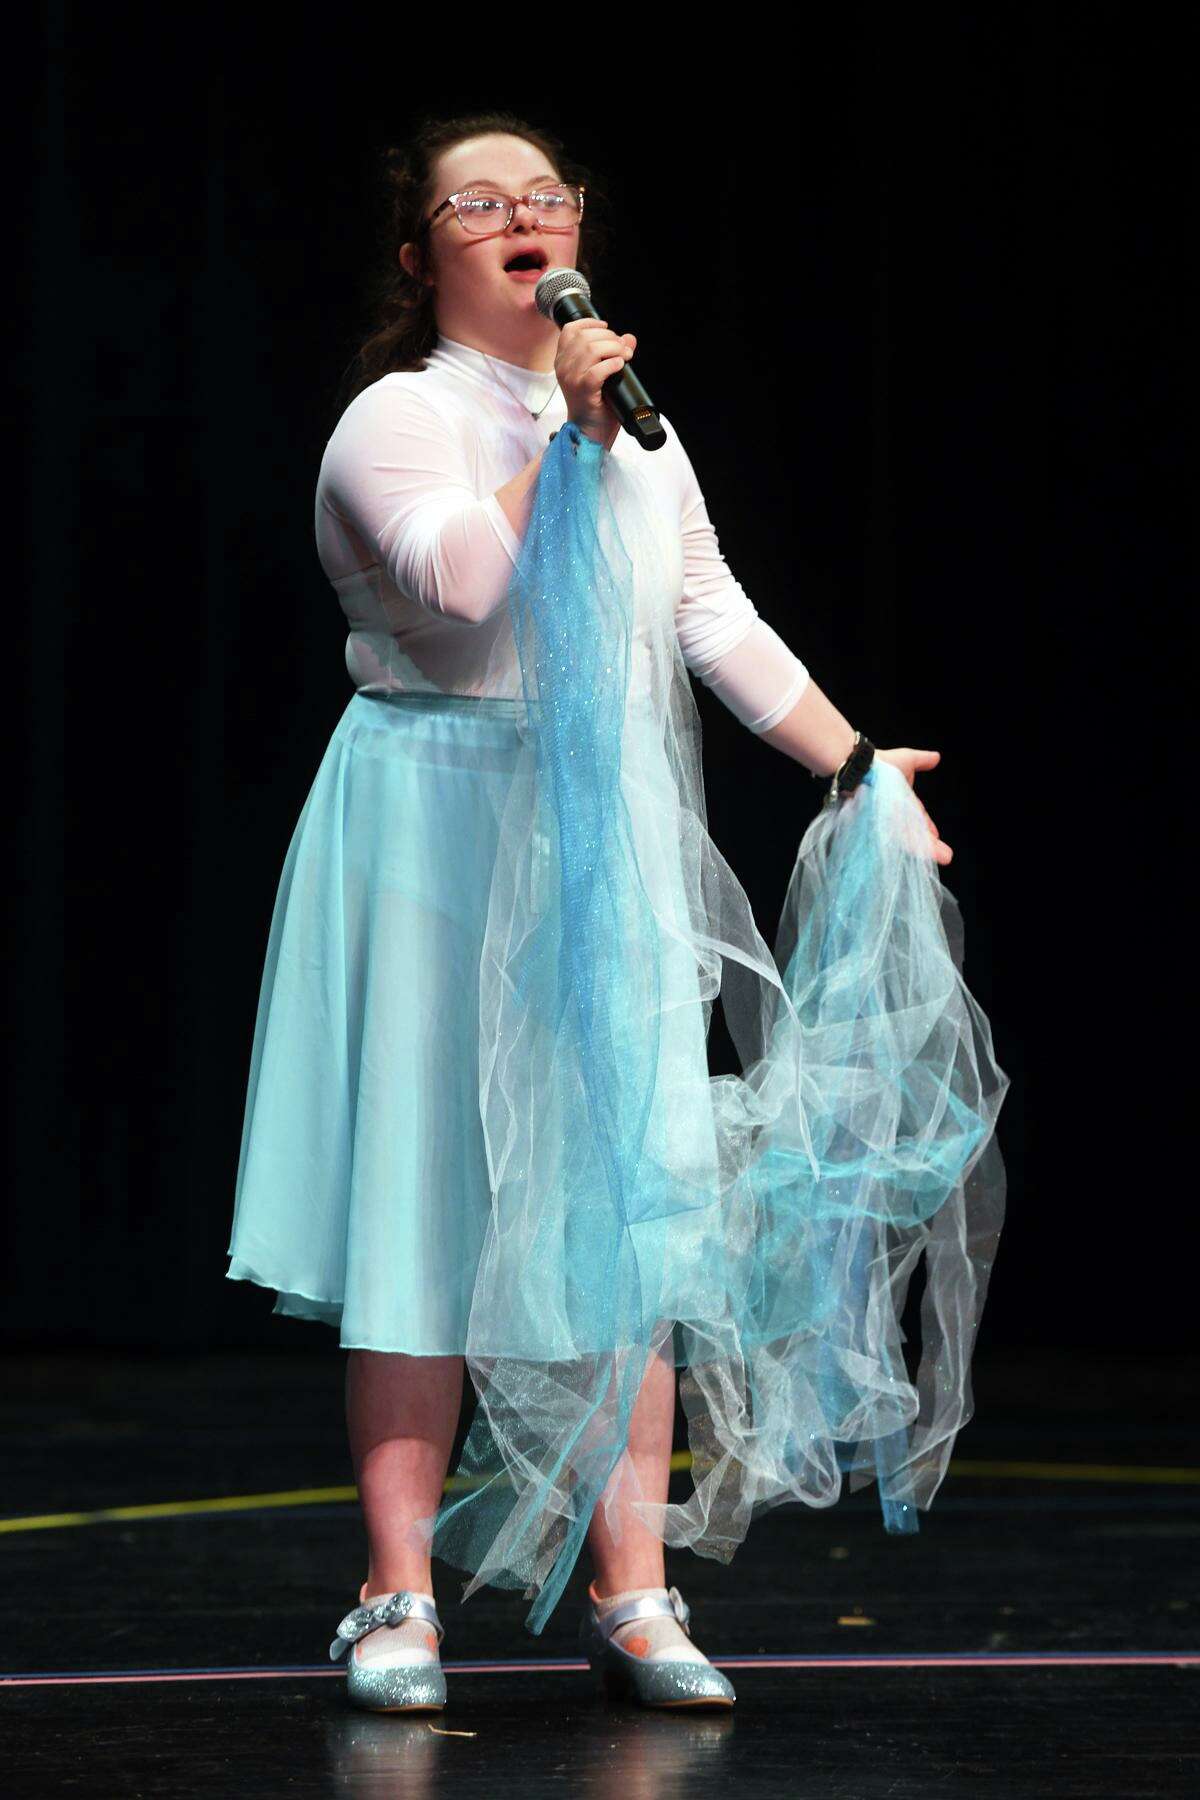 Faith Berni in the roll of Elsa sings during rehearsals for The Milford Adaptive Program’s production of “Frozen” on stage at the Parsons Complex Auditorium, in Milford, Conn. June 2, 2022.